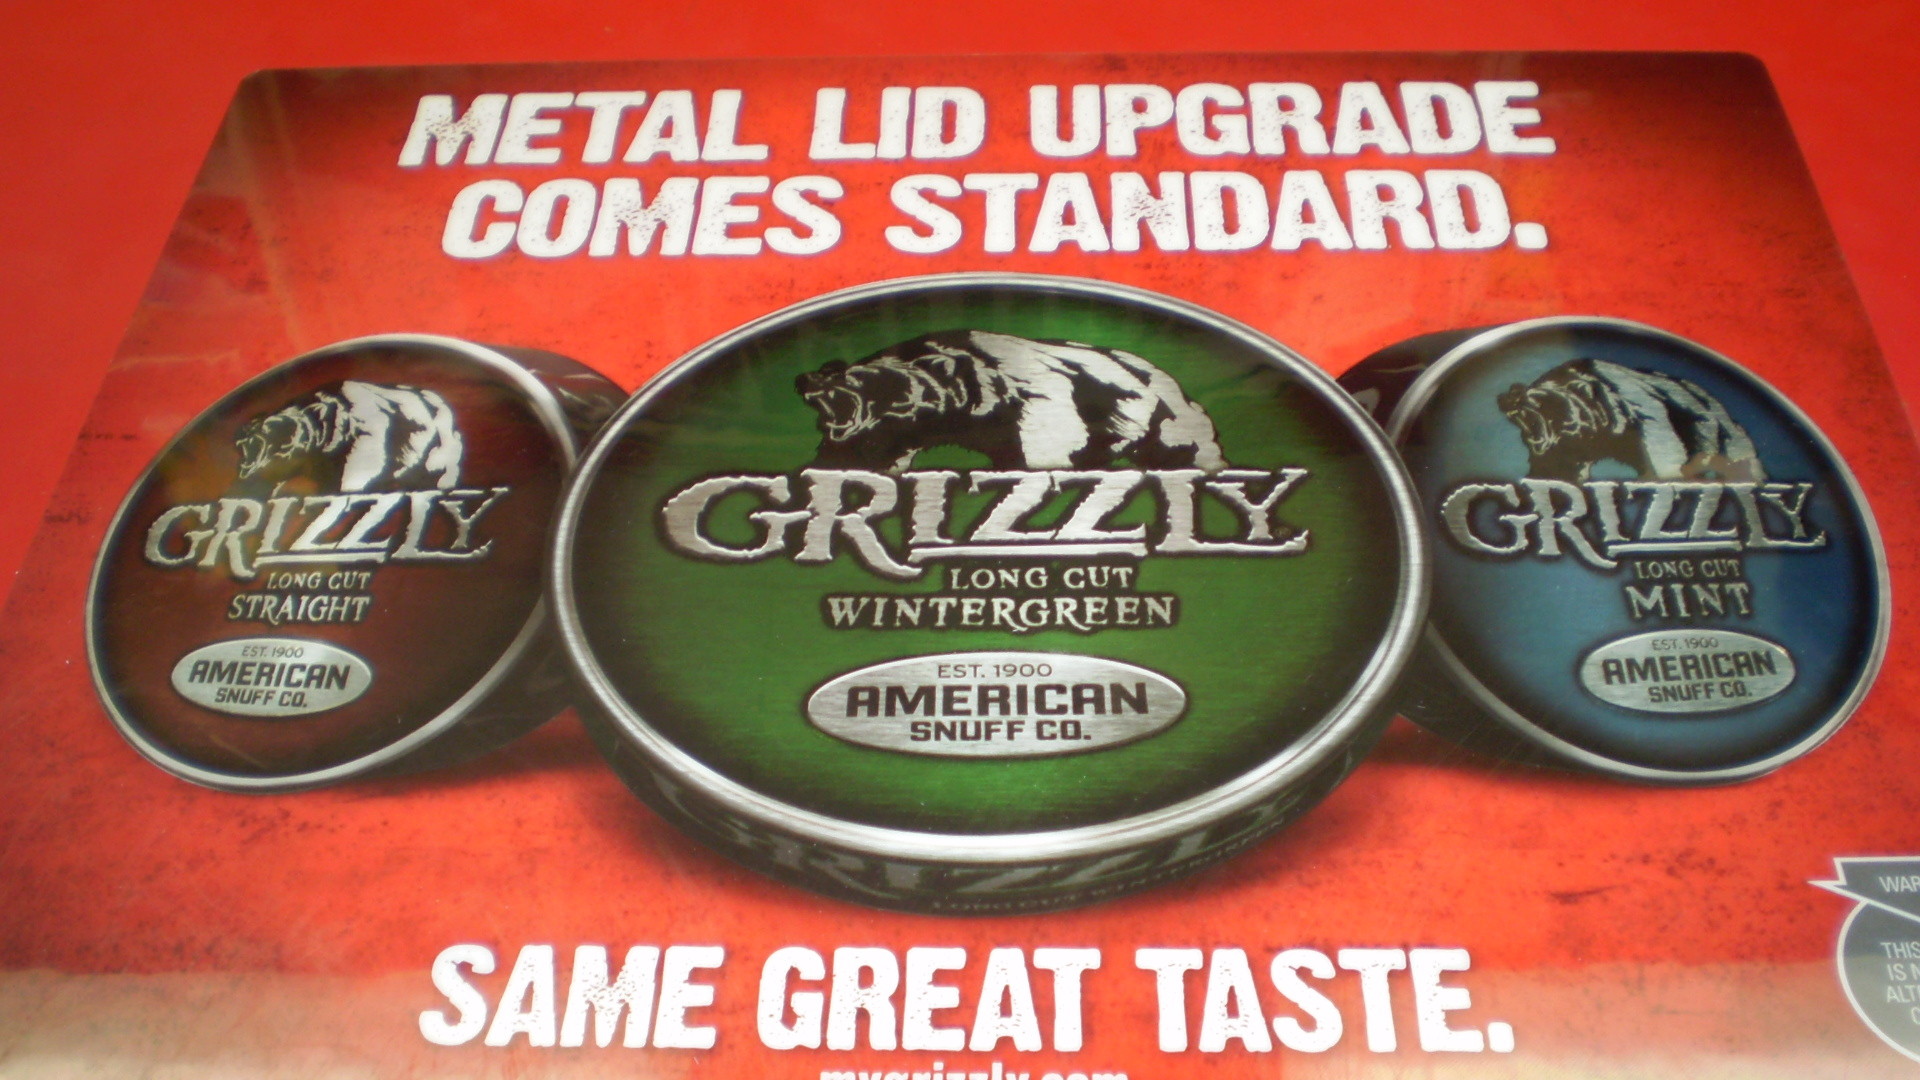 maker of grizzly to change name to american snuff company grizzly .